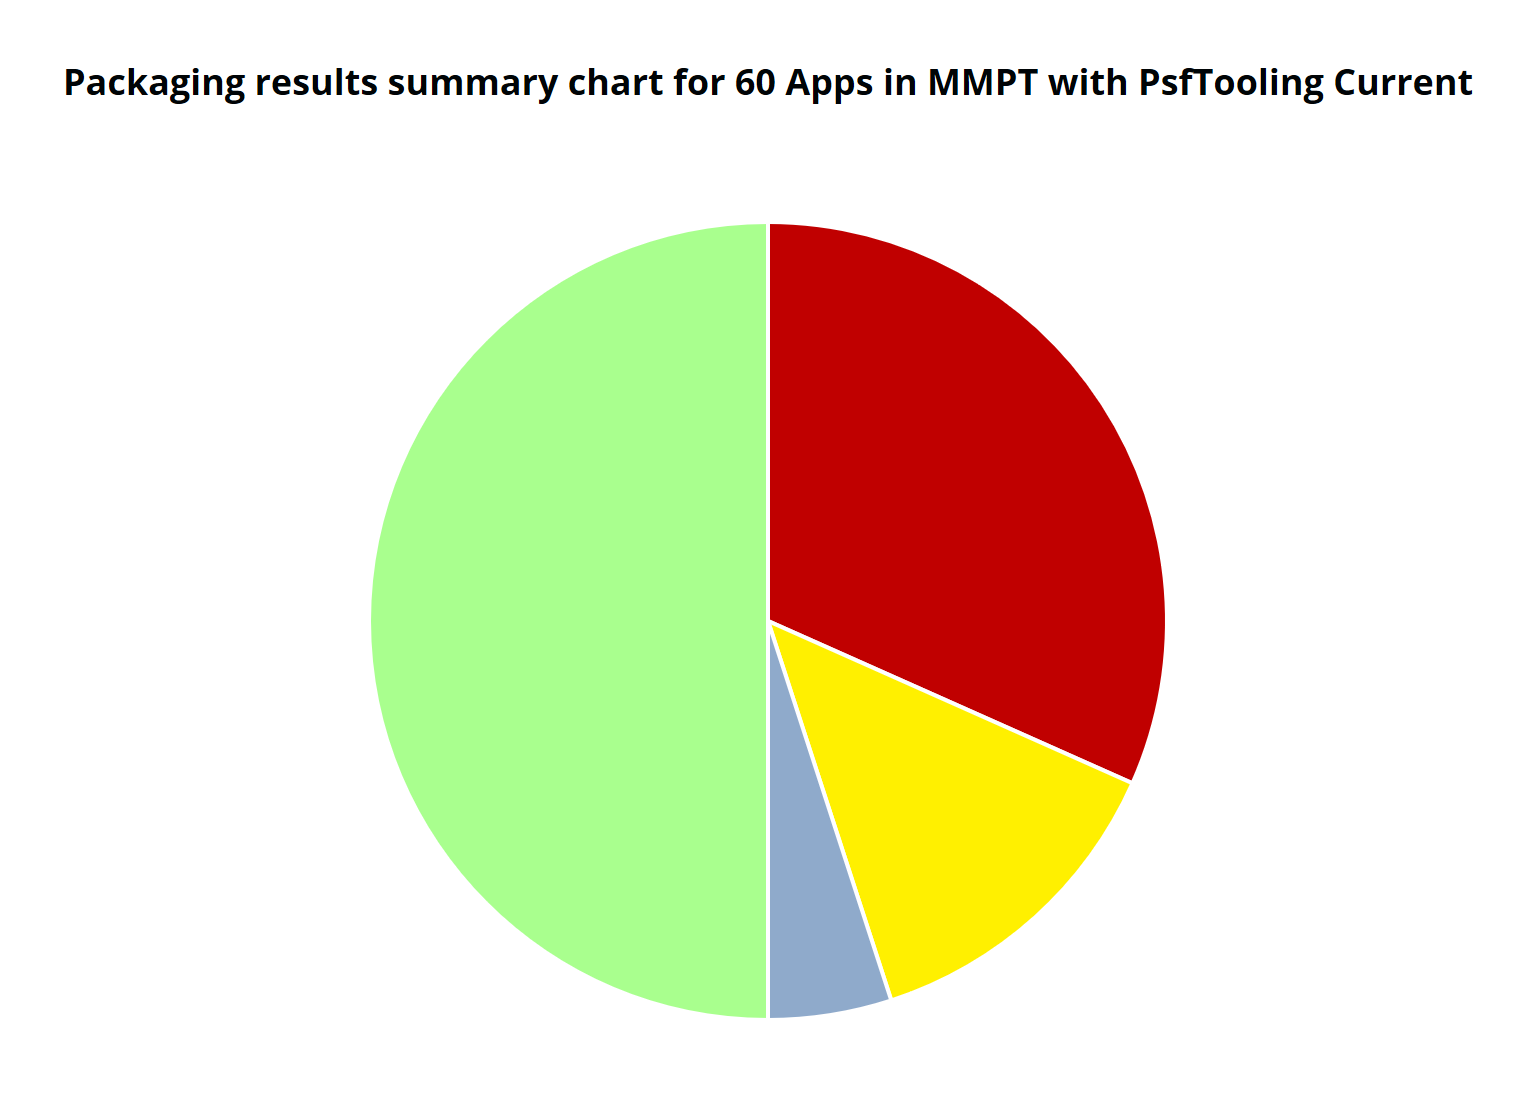 Chart showing testing results of 60 apps using the current version of PsfTooling.